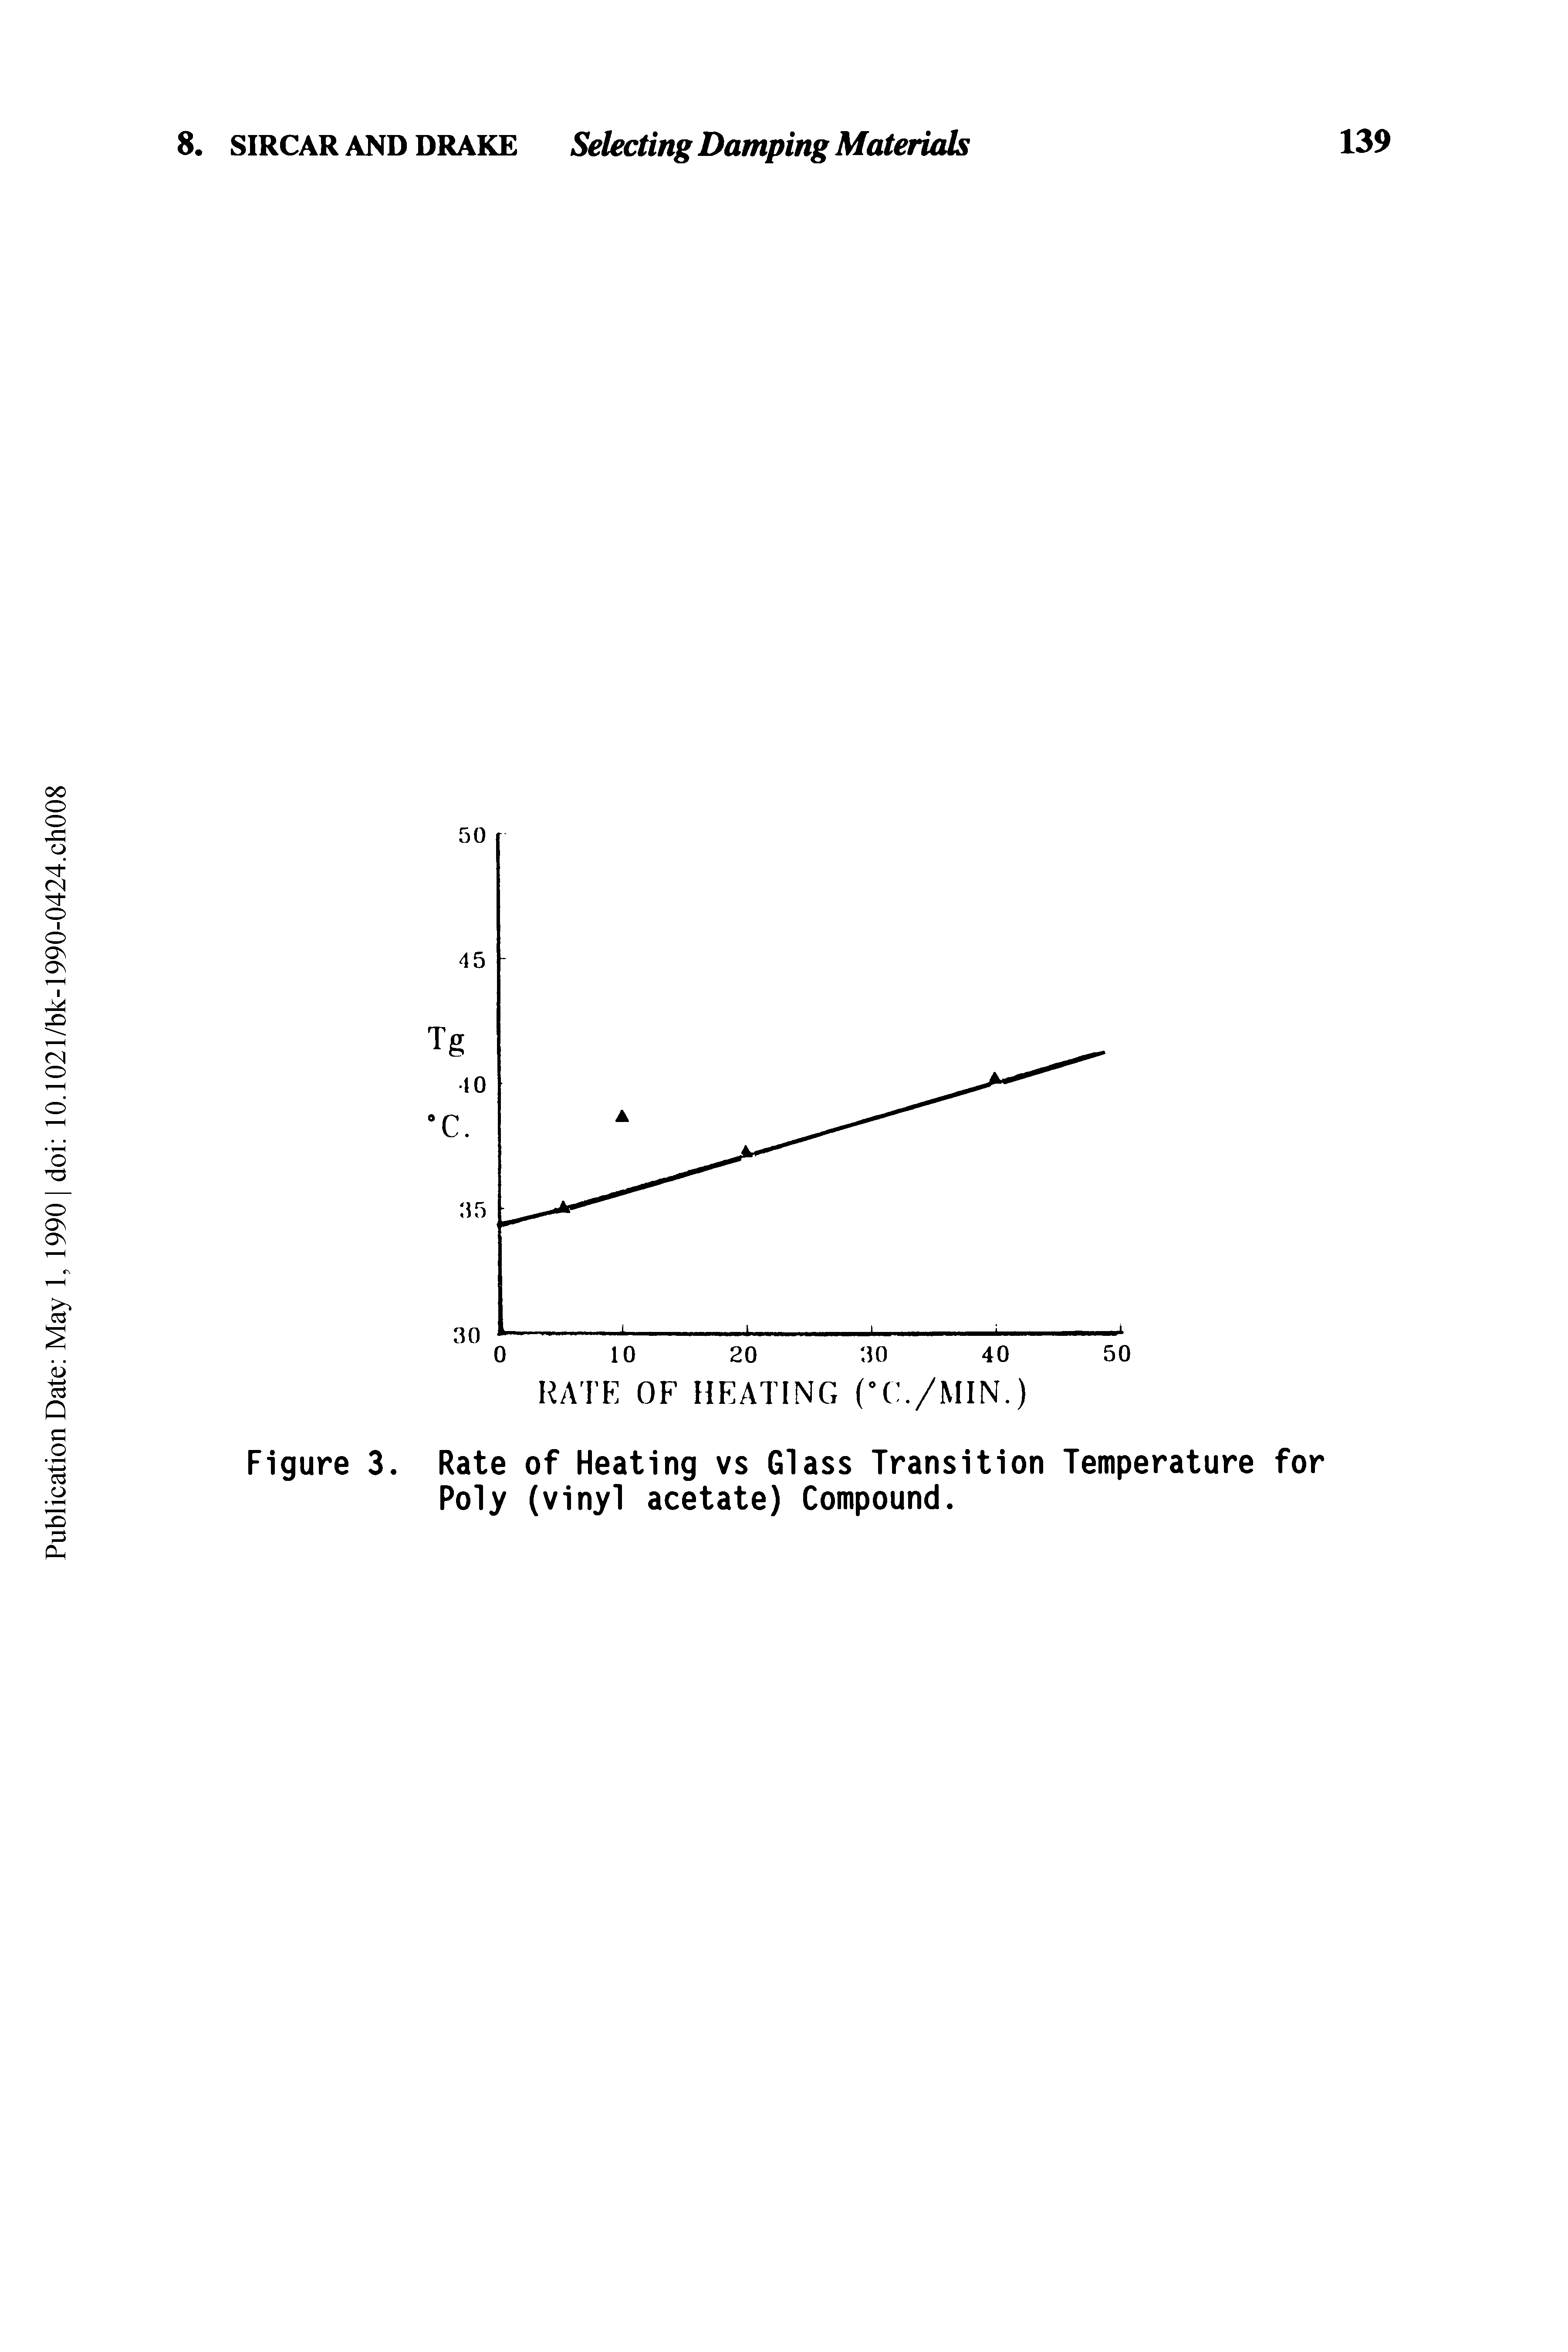 Figure 3. Rate of Heating vs Glass Transition Temperature for Poly (vinyl acetate) Compound.